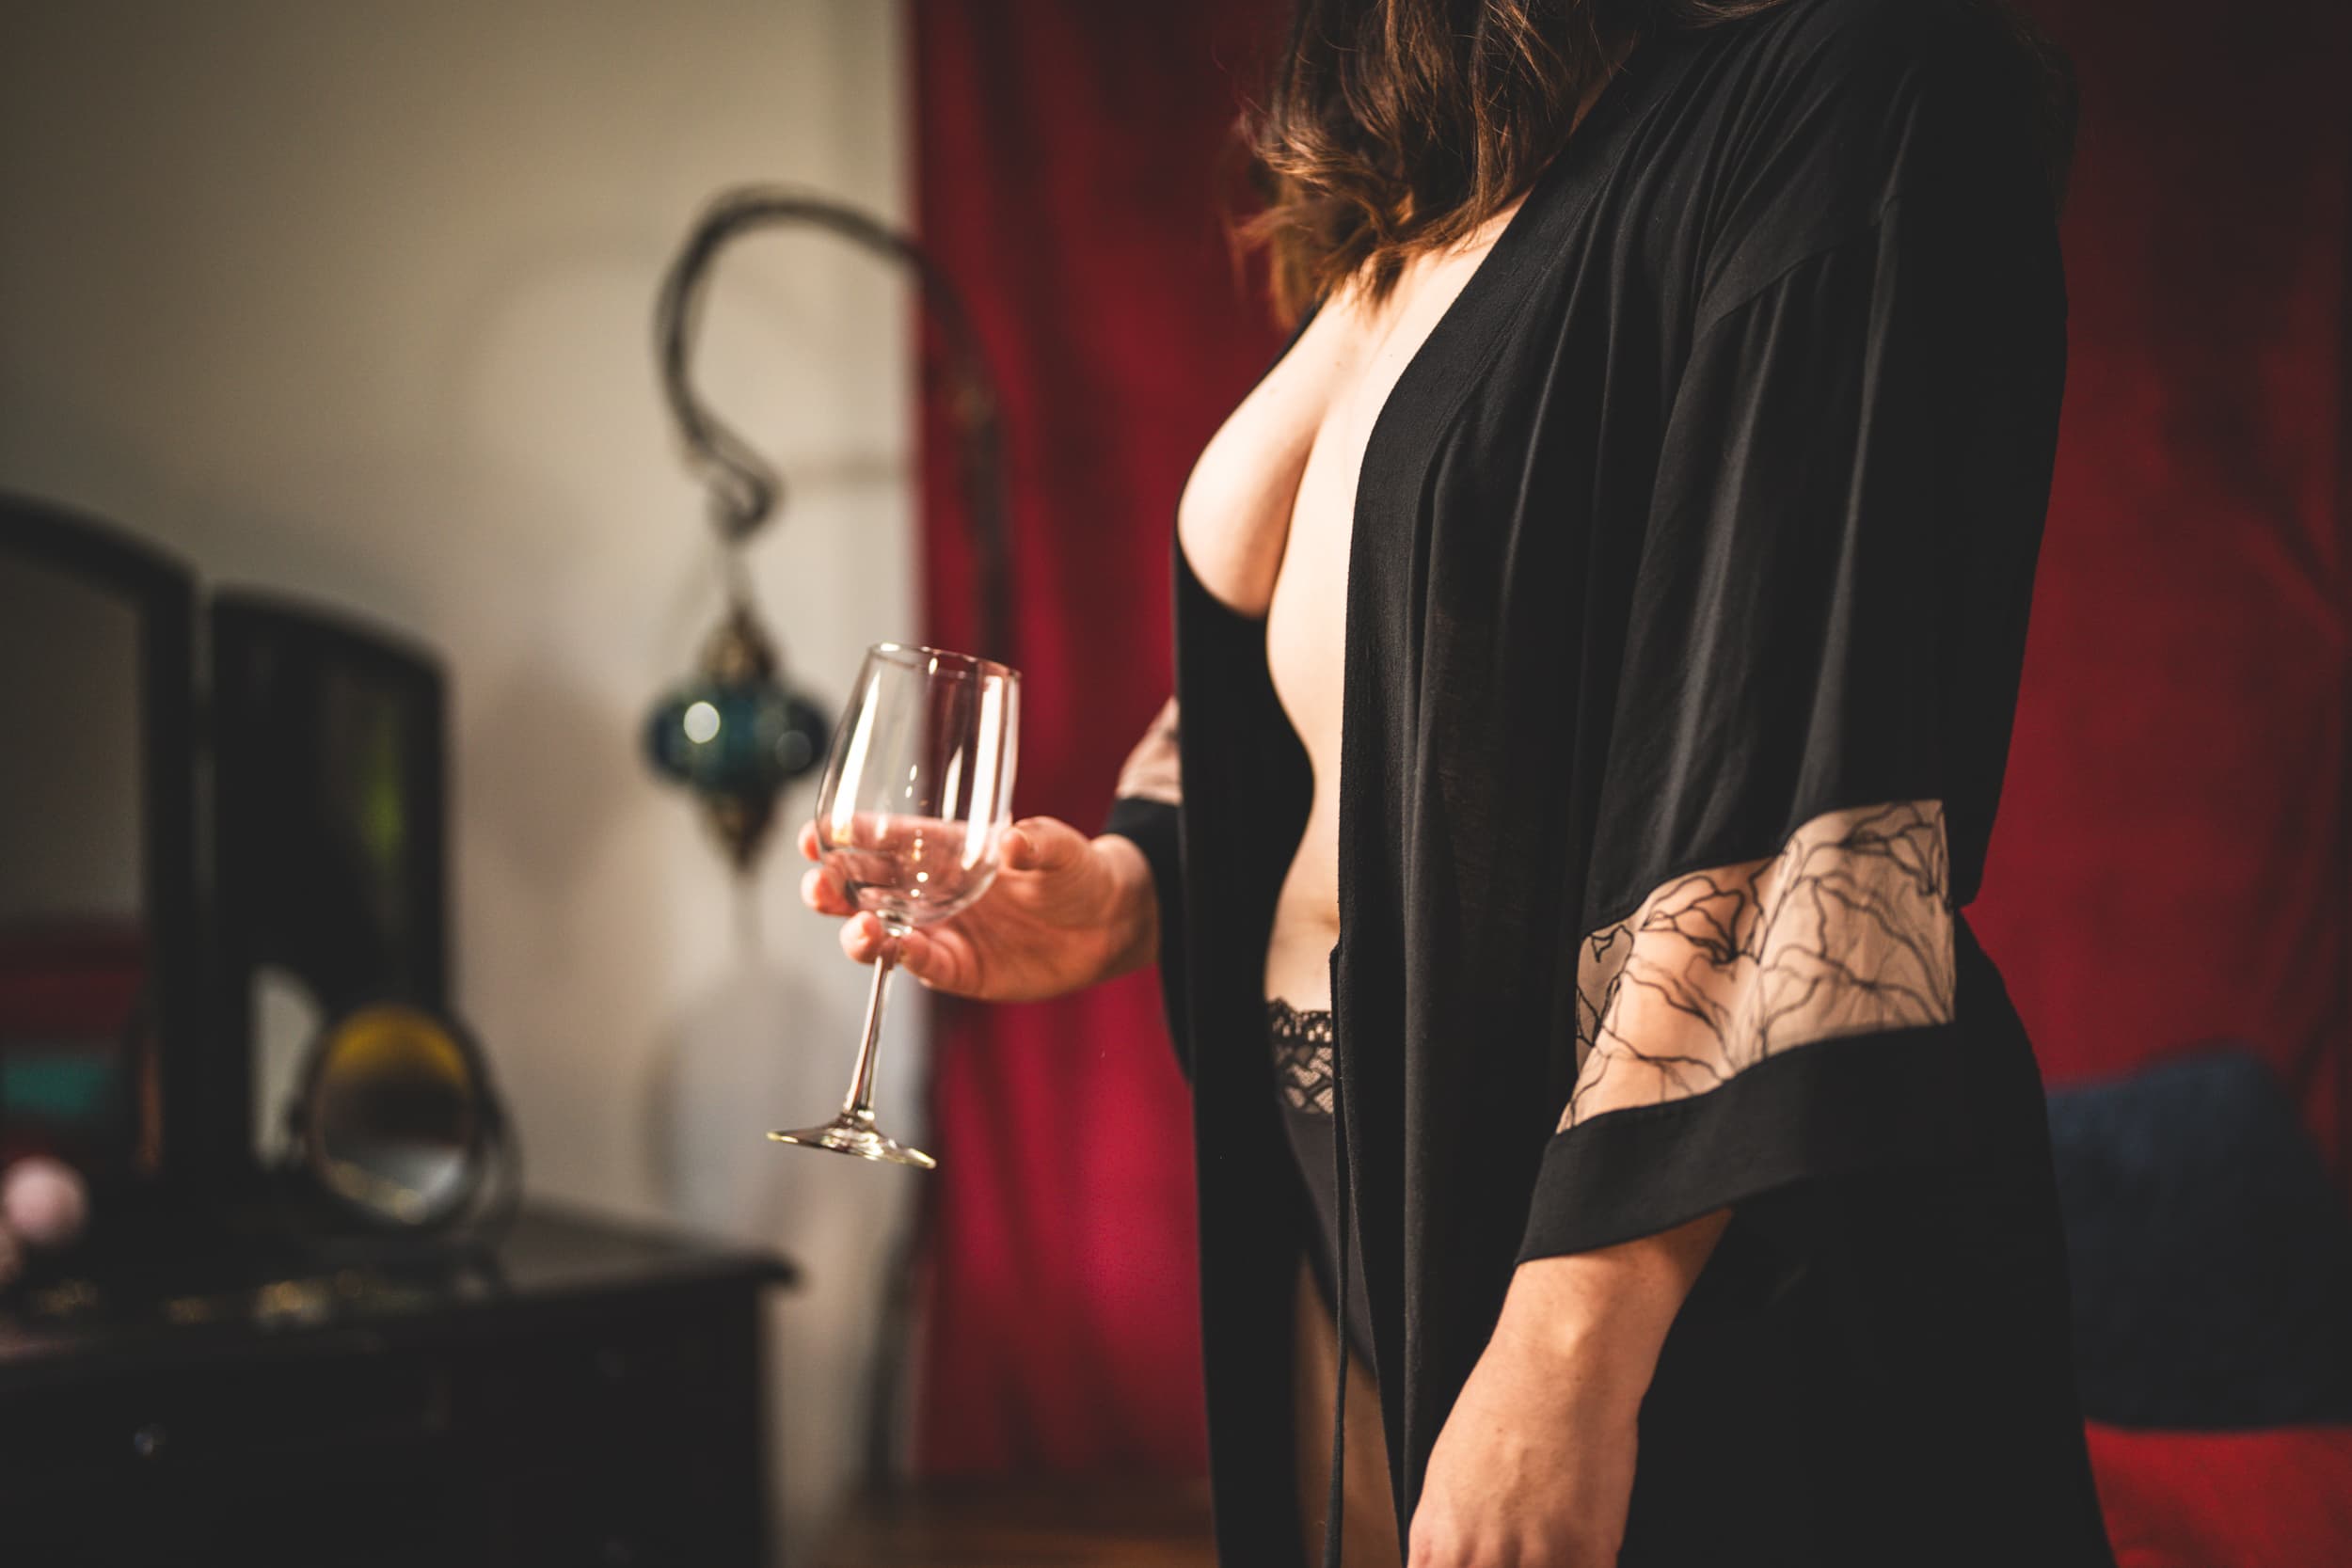 A woman in a black robe and lingerie, holding a wine glass in one hand, with a vintage interior background.